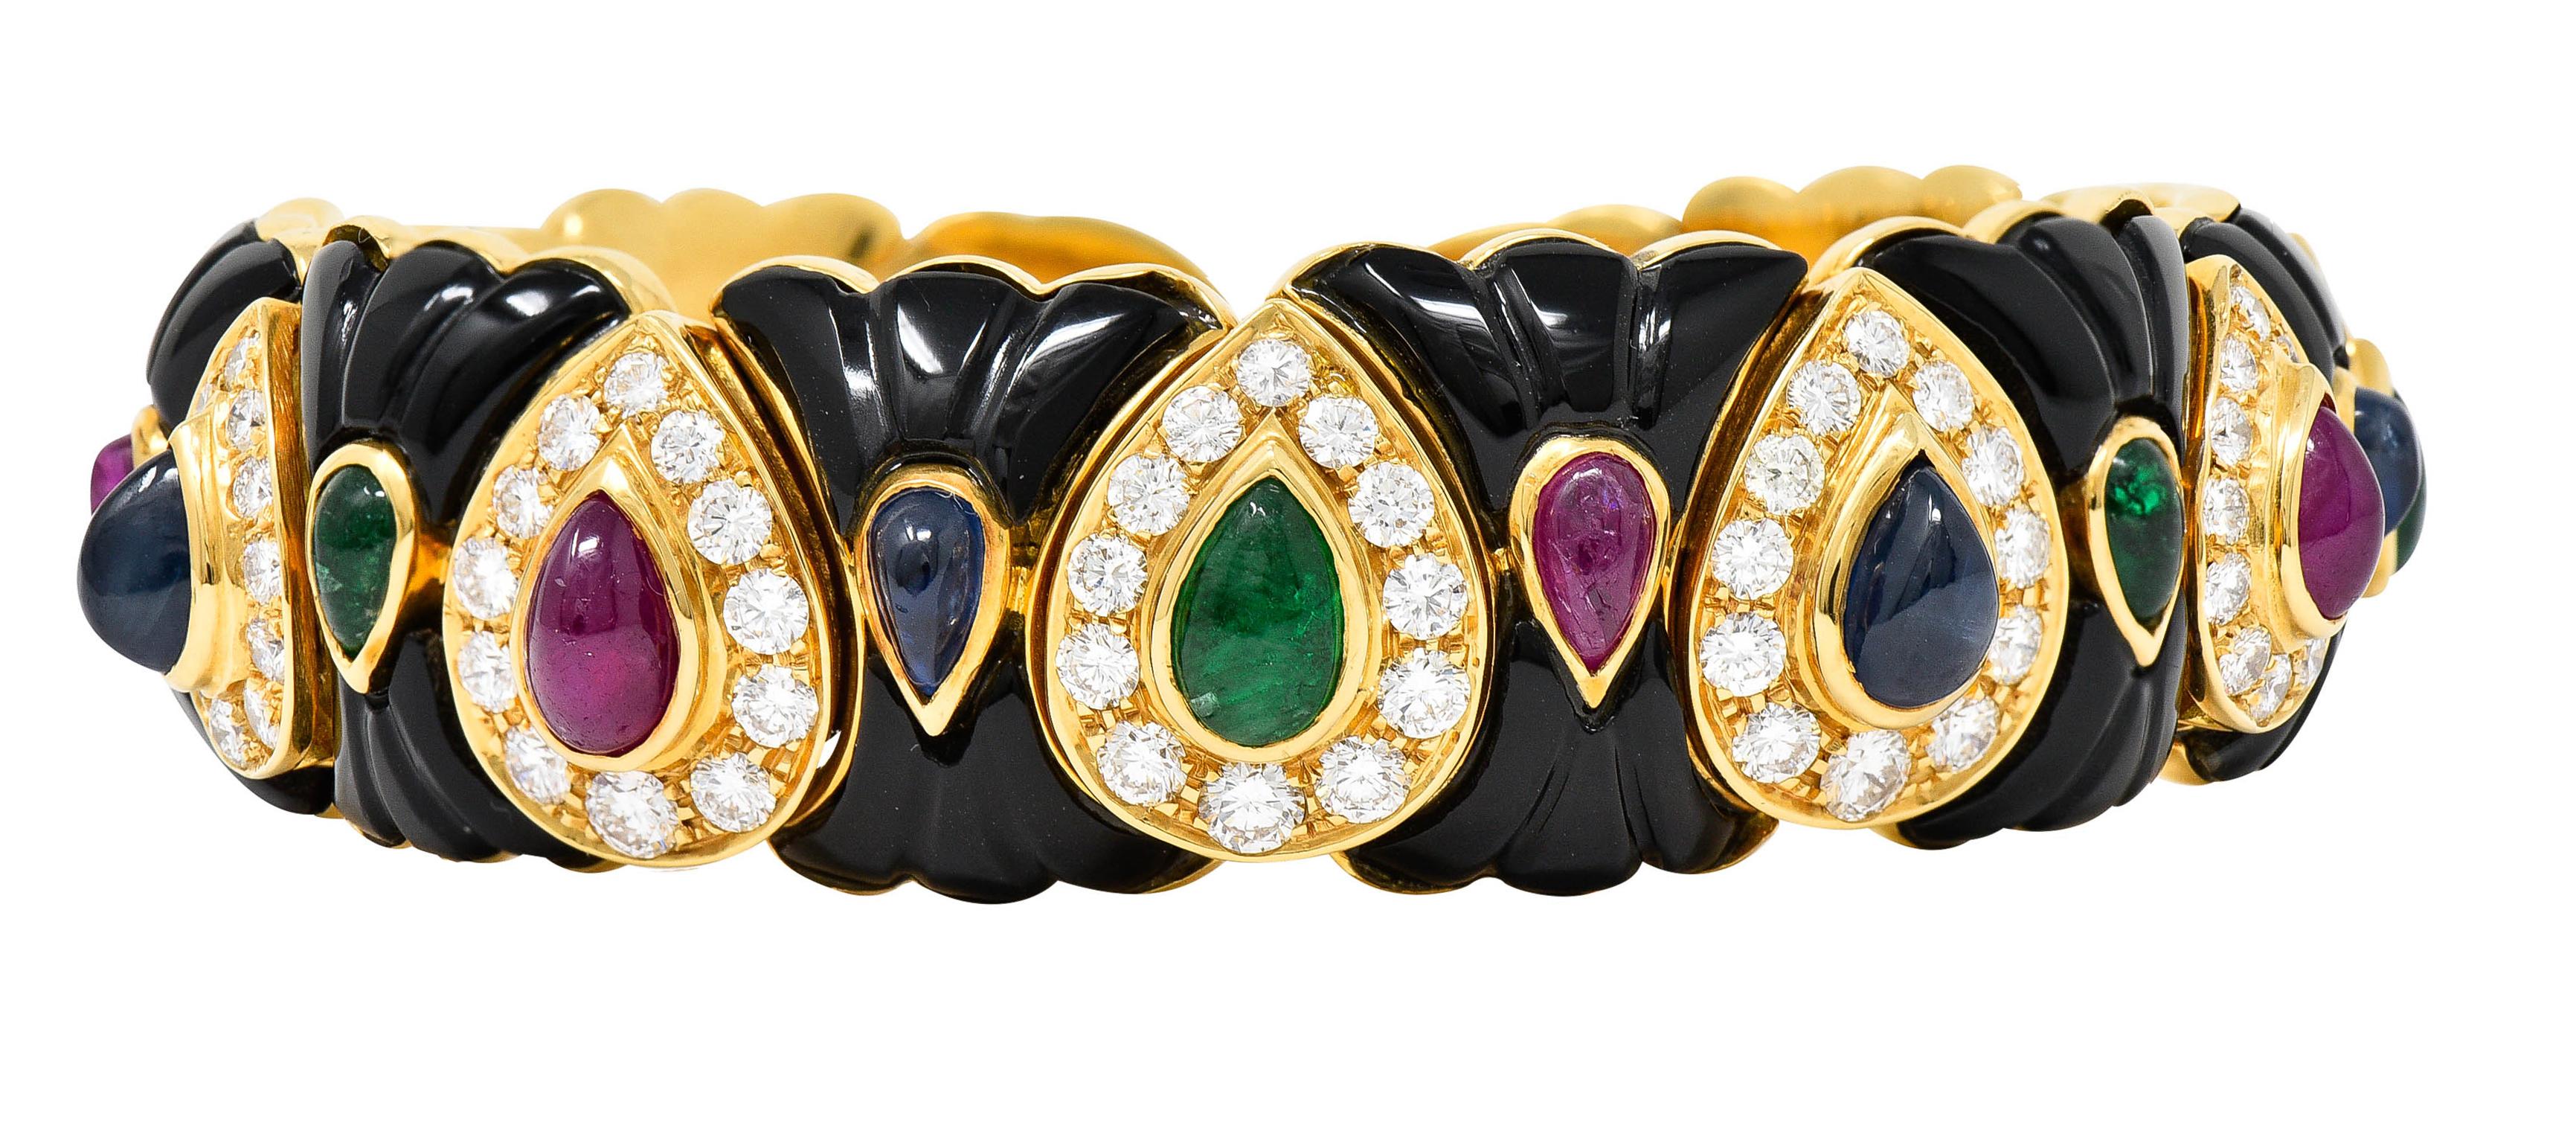 Cuff bracelet is comprised of hour glass shaped links alternating with chestnut shaped links

Hourglass links feature calibrè cut onyx - opaque black with excellent polish

Chestnut shaped links are bead set with halos of round brilliant cut